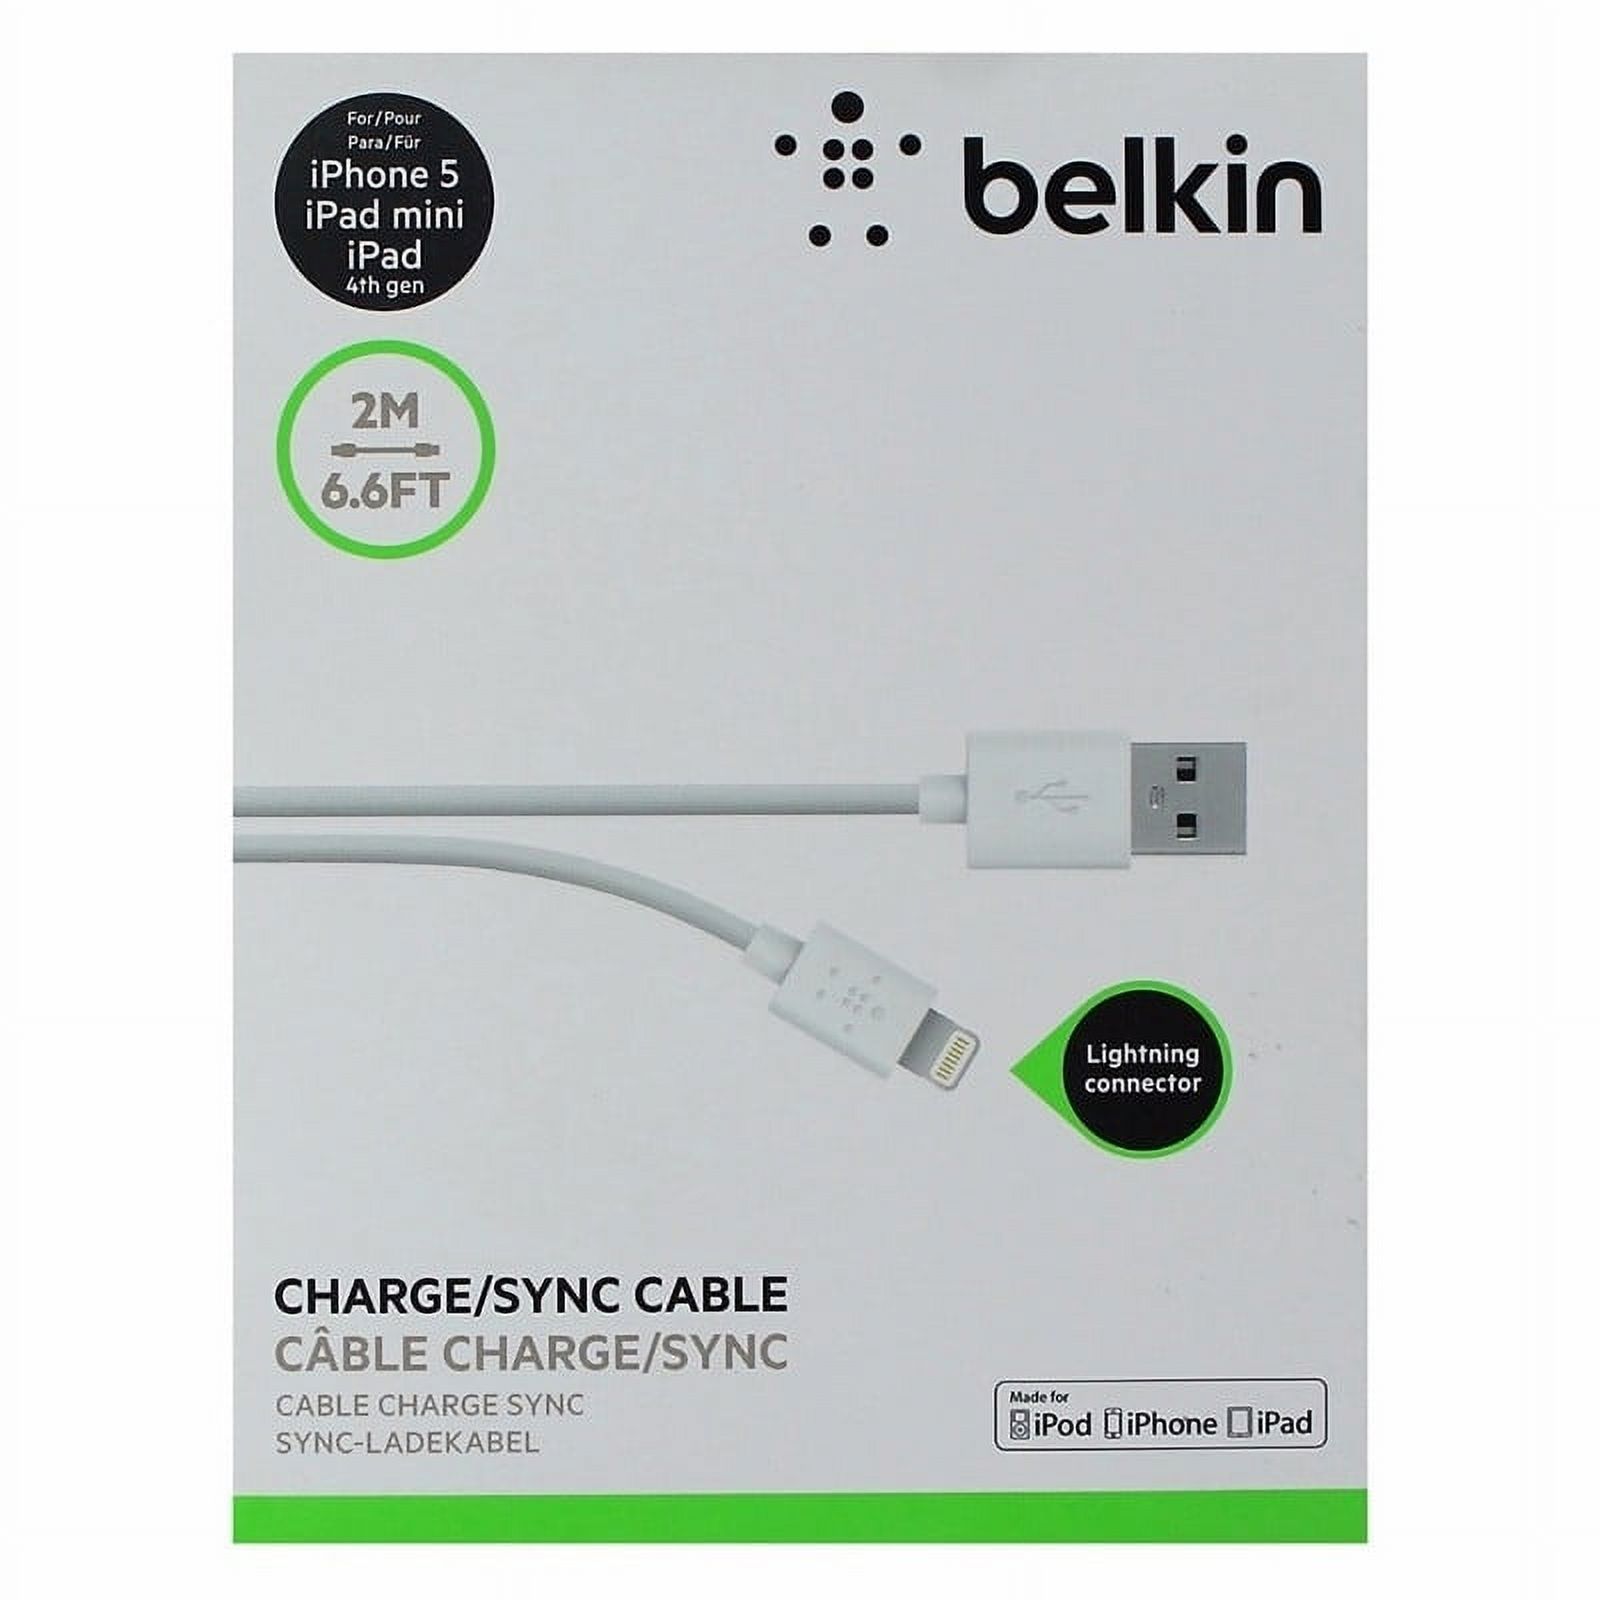 Belkin ( F8J023BT2M - WHT) 6.6Ft Charge/Sync Cable for iPhones - White - image 1 of 2